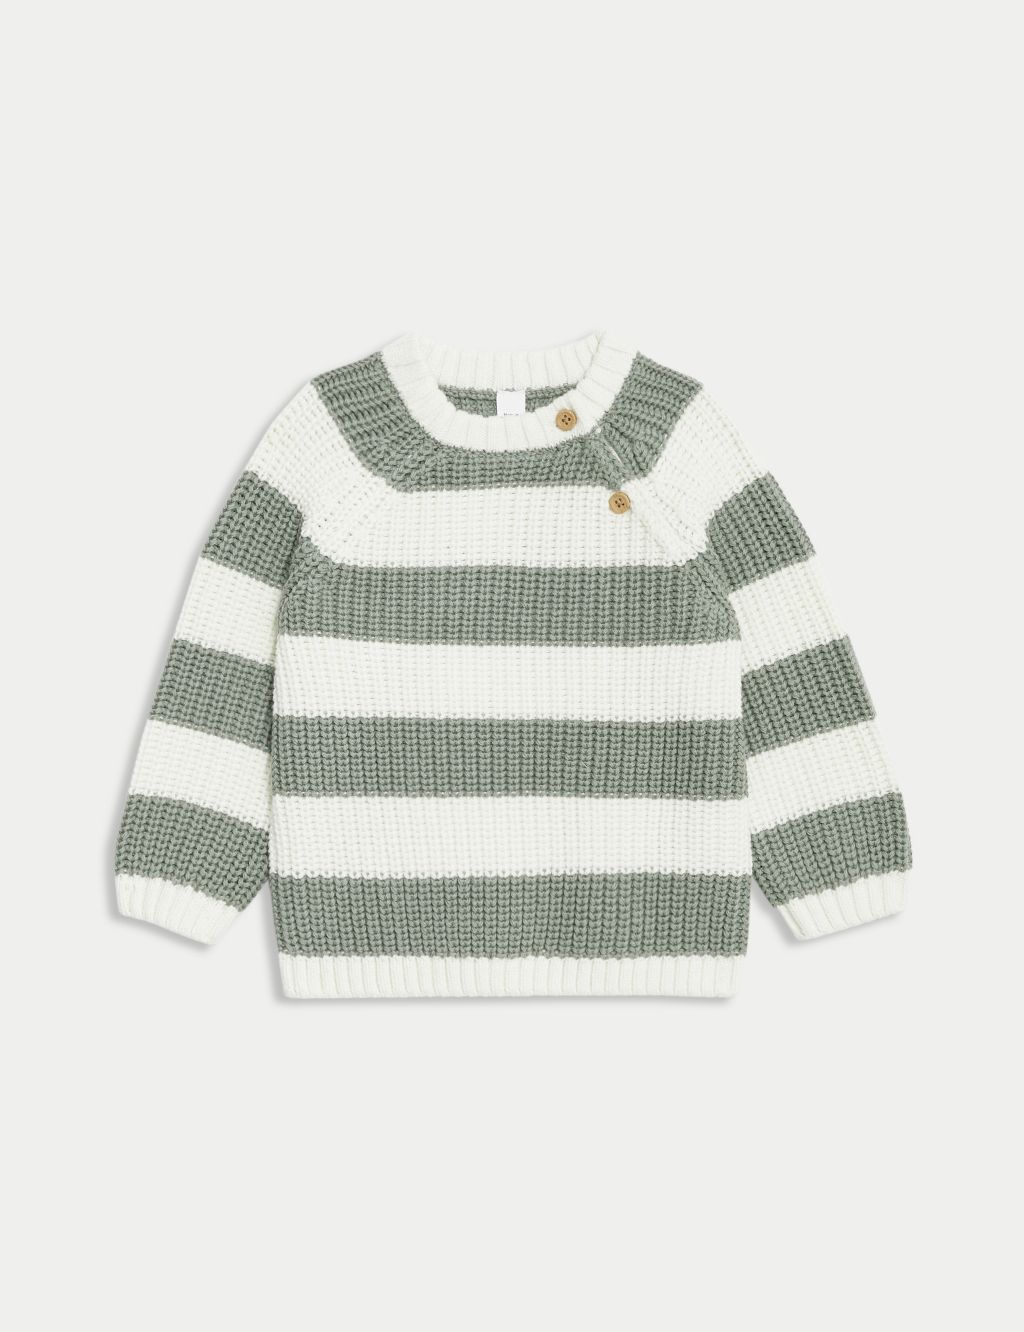 Pure Cotton Striped Knitted Jumper (0-3 Yrs)